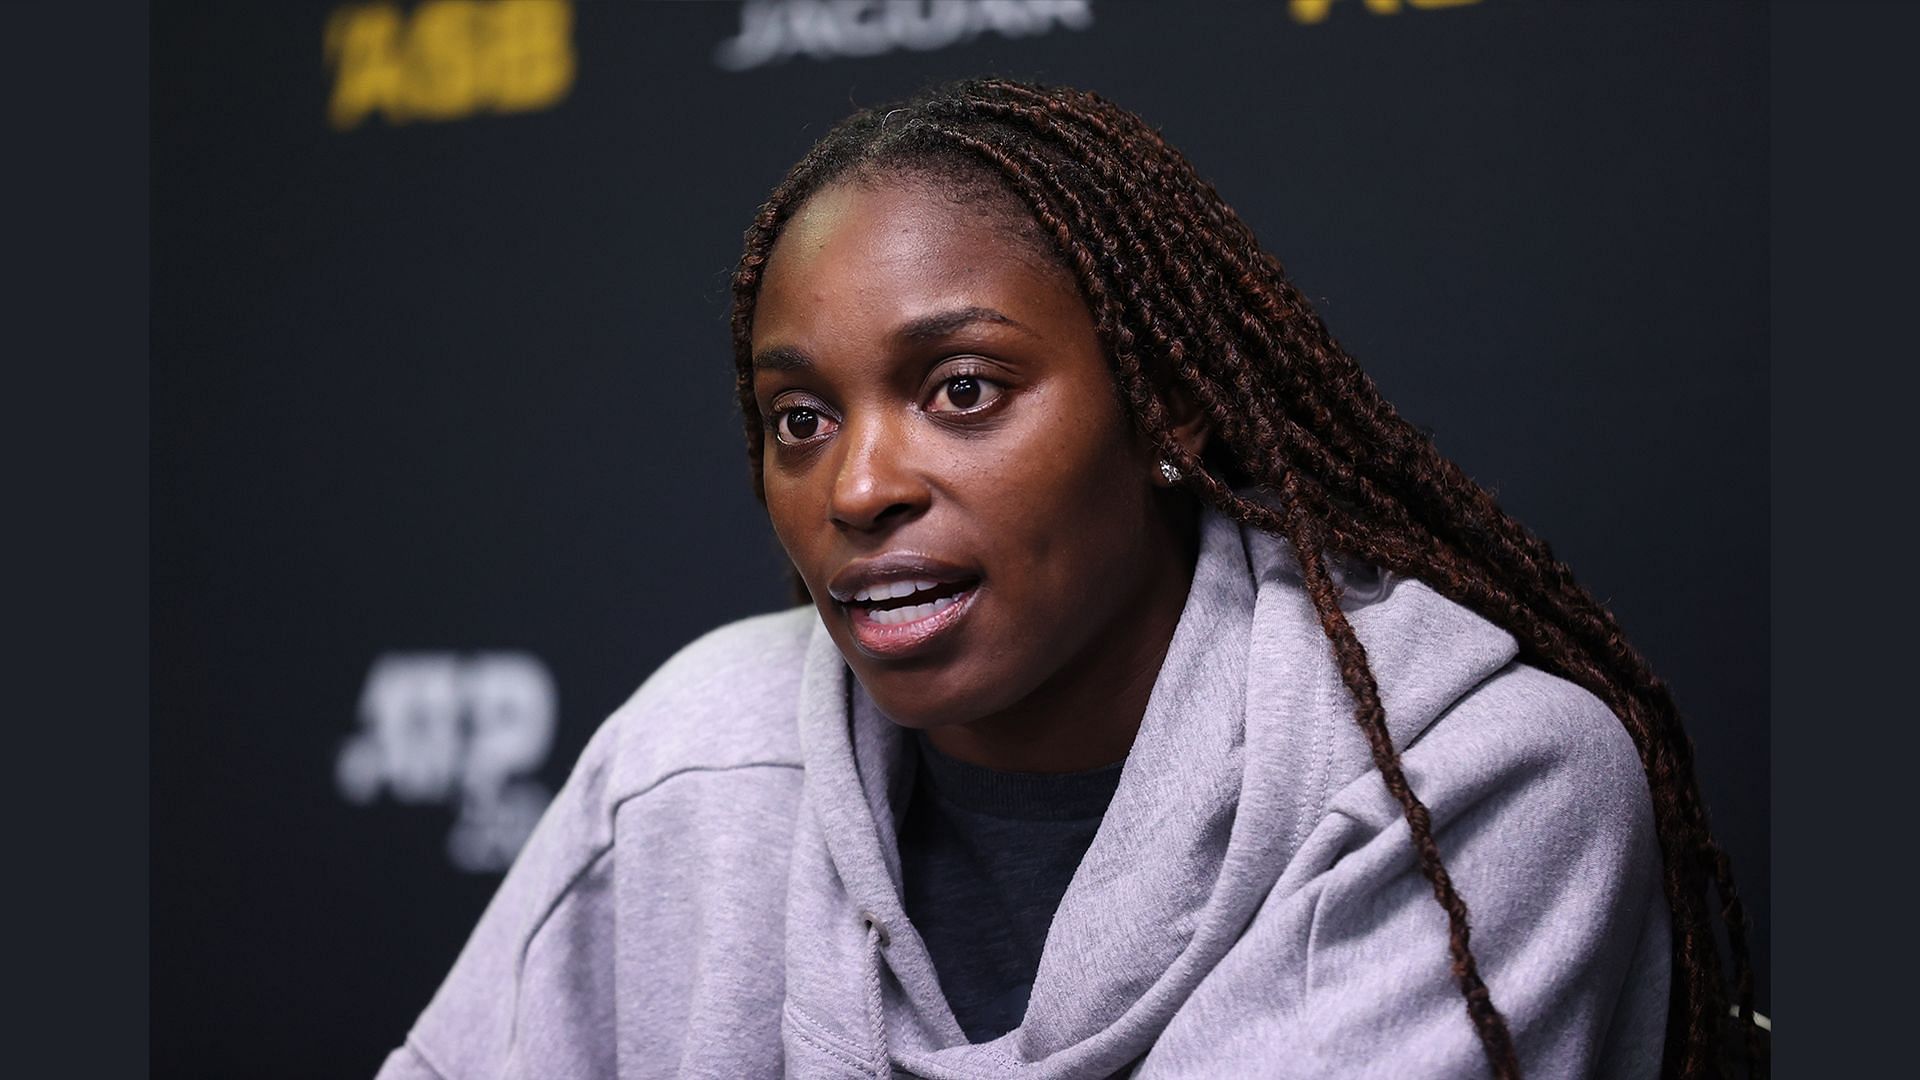 Sloane Stephens shares her tennis update, Christmas plans, life lessons she learnt this year and more